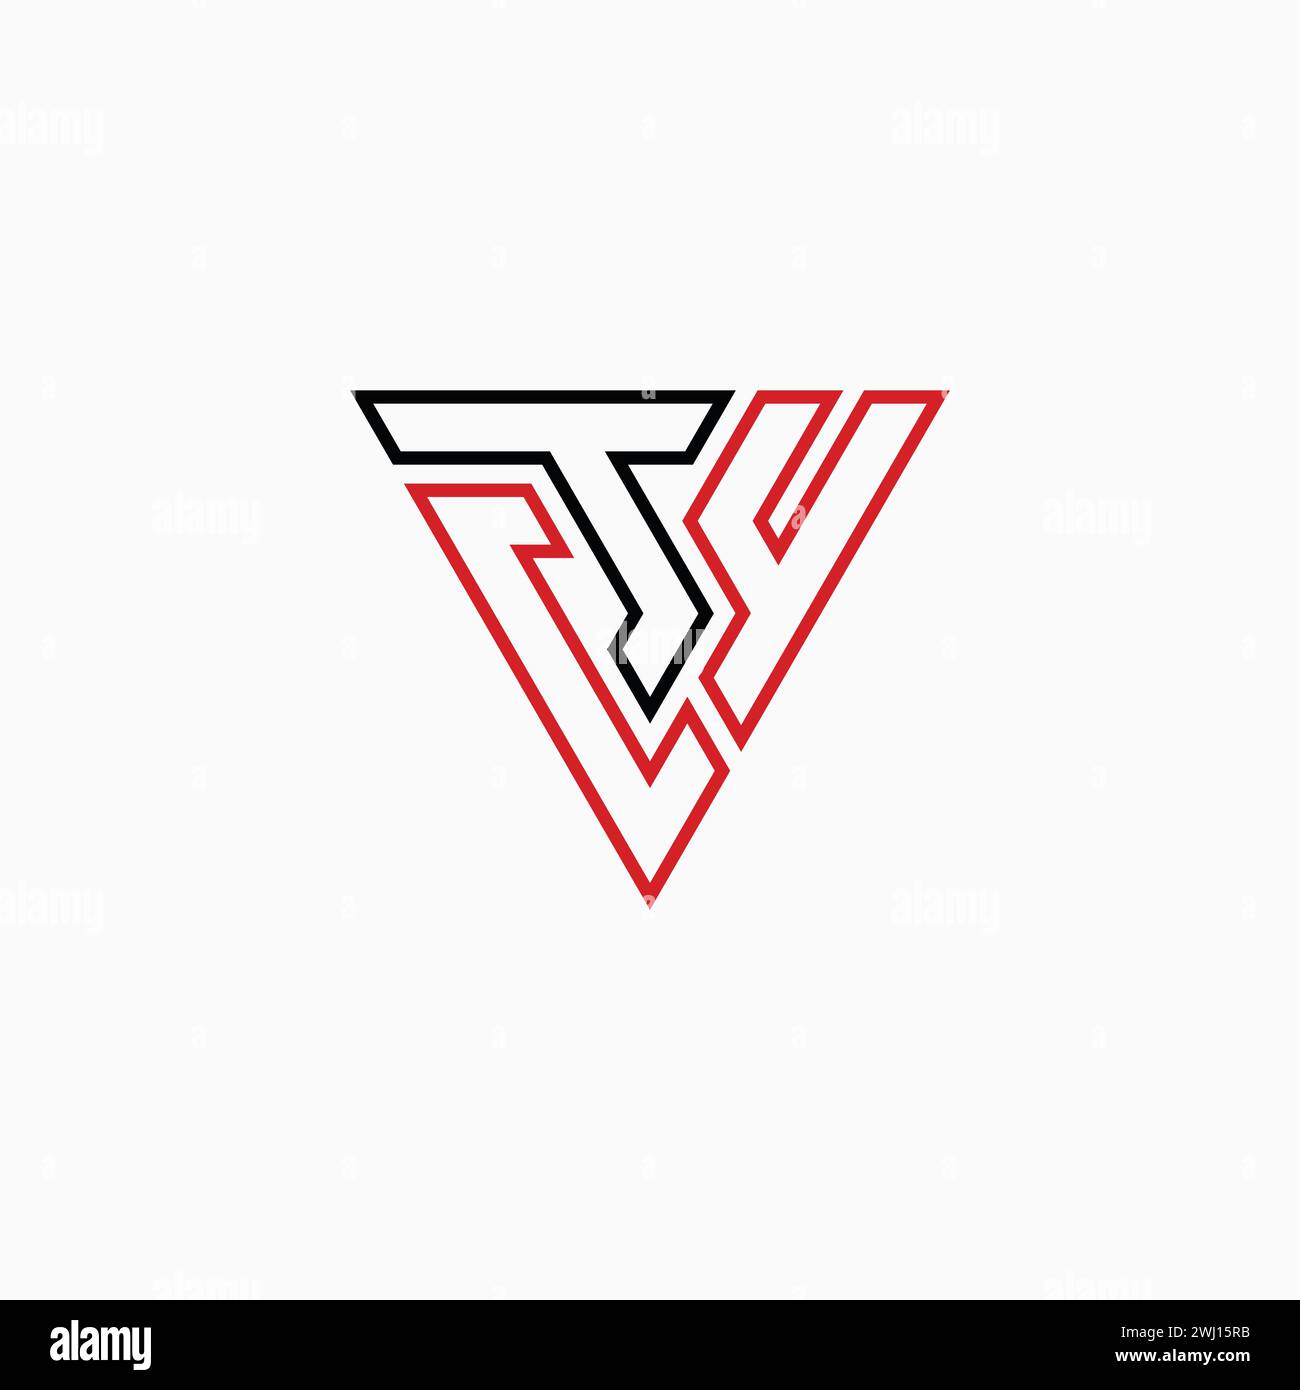 Logo design graphic concept creative premium vector stock letter initial CT4 or CTY font line triangle. Related to monogram sport fitness active brand Stock Vector